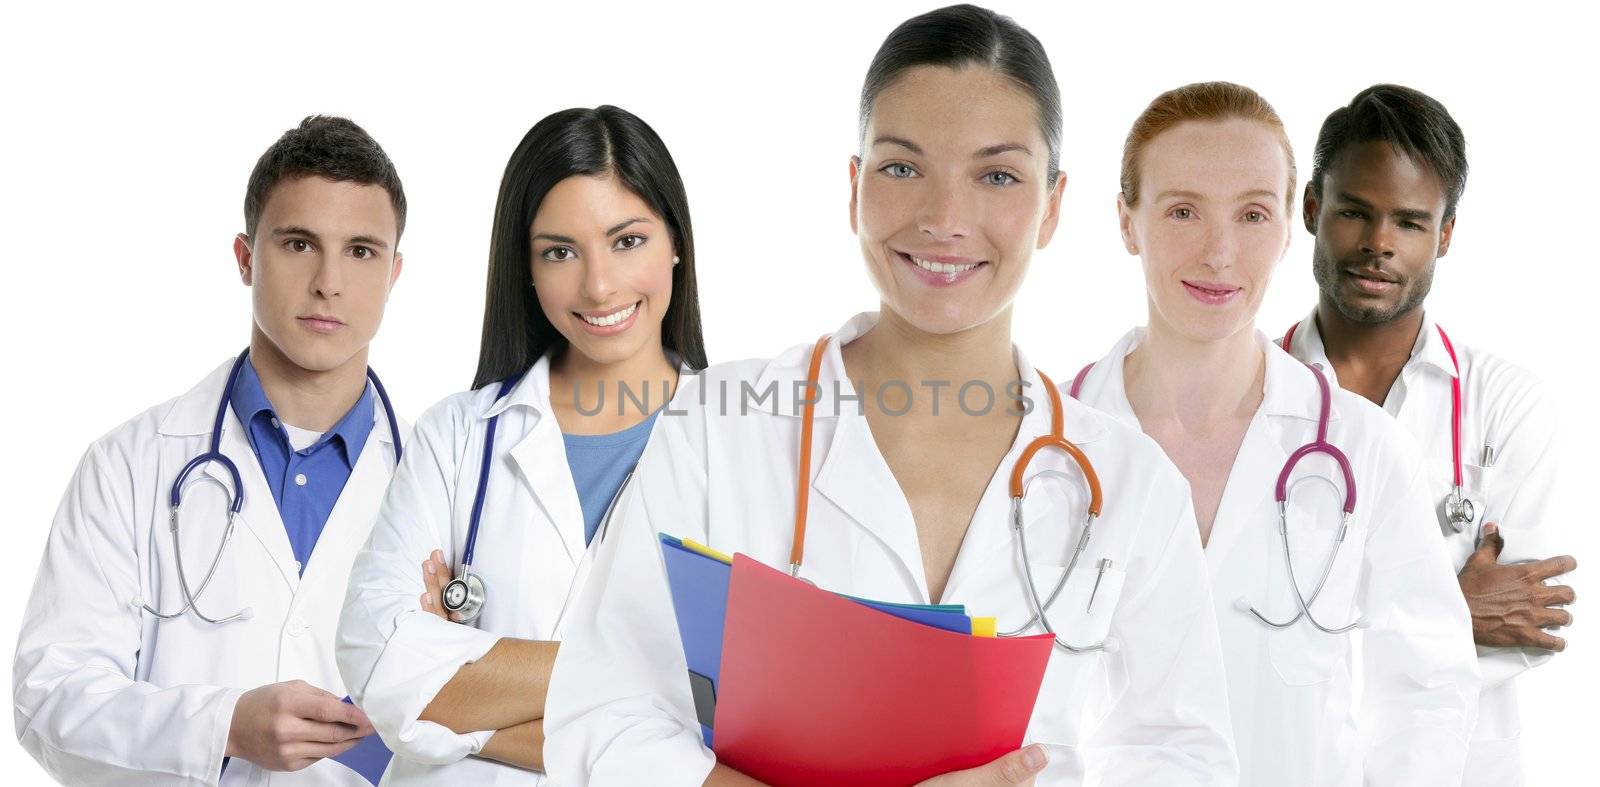 Doctors team group in a row white background by lunamarina